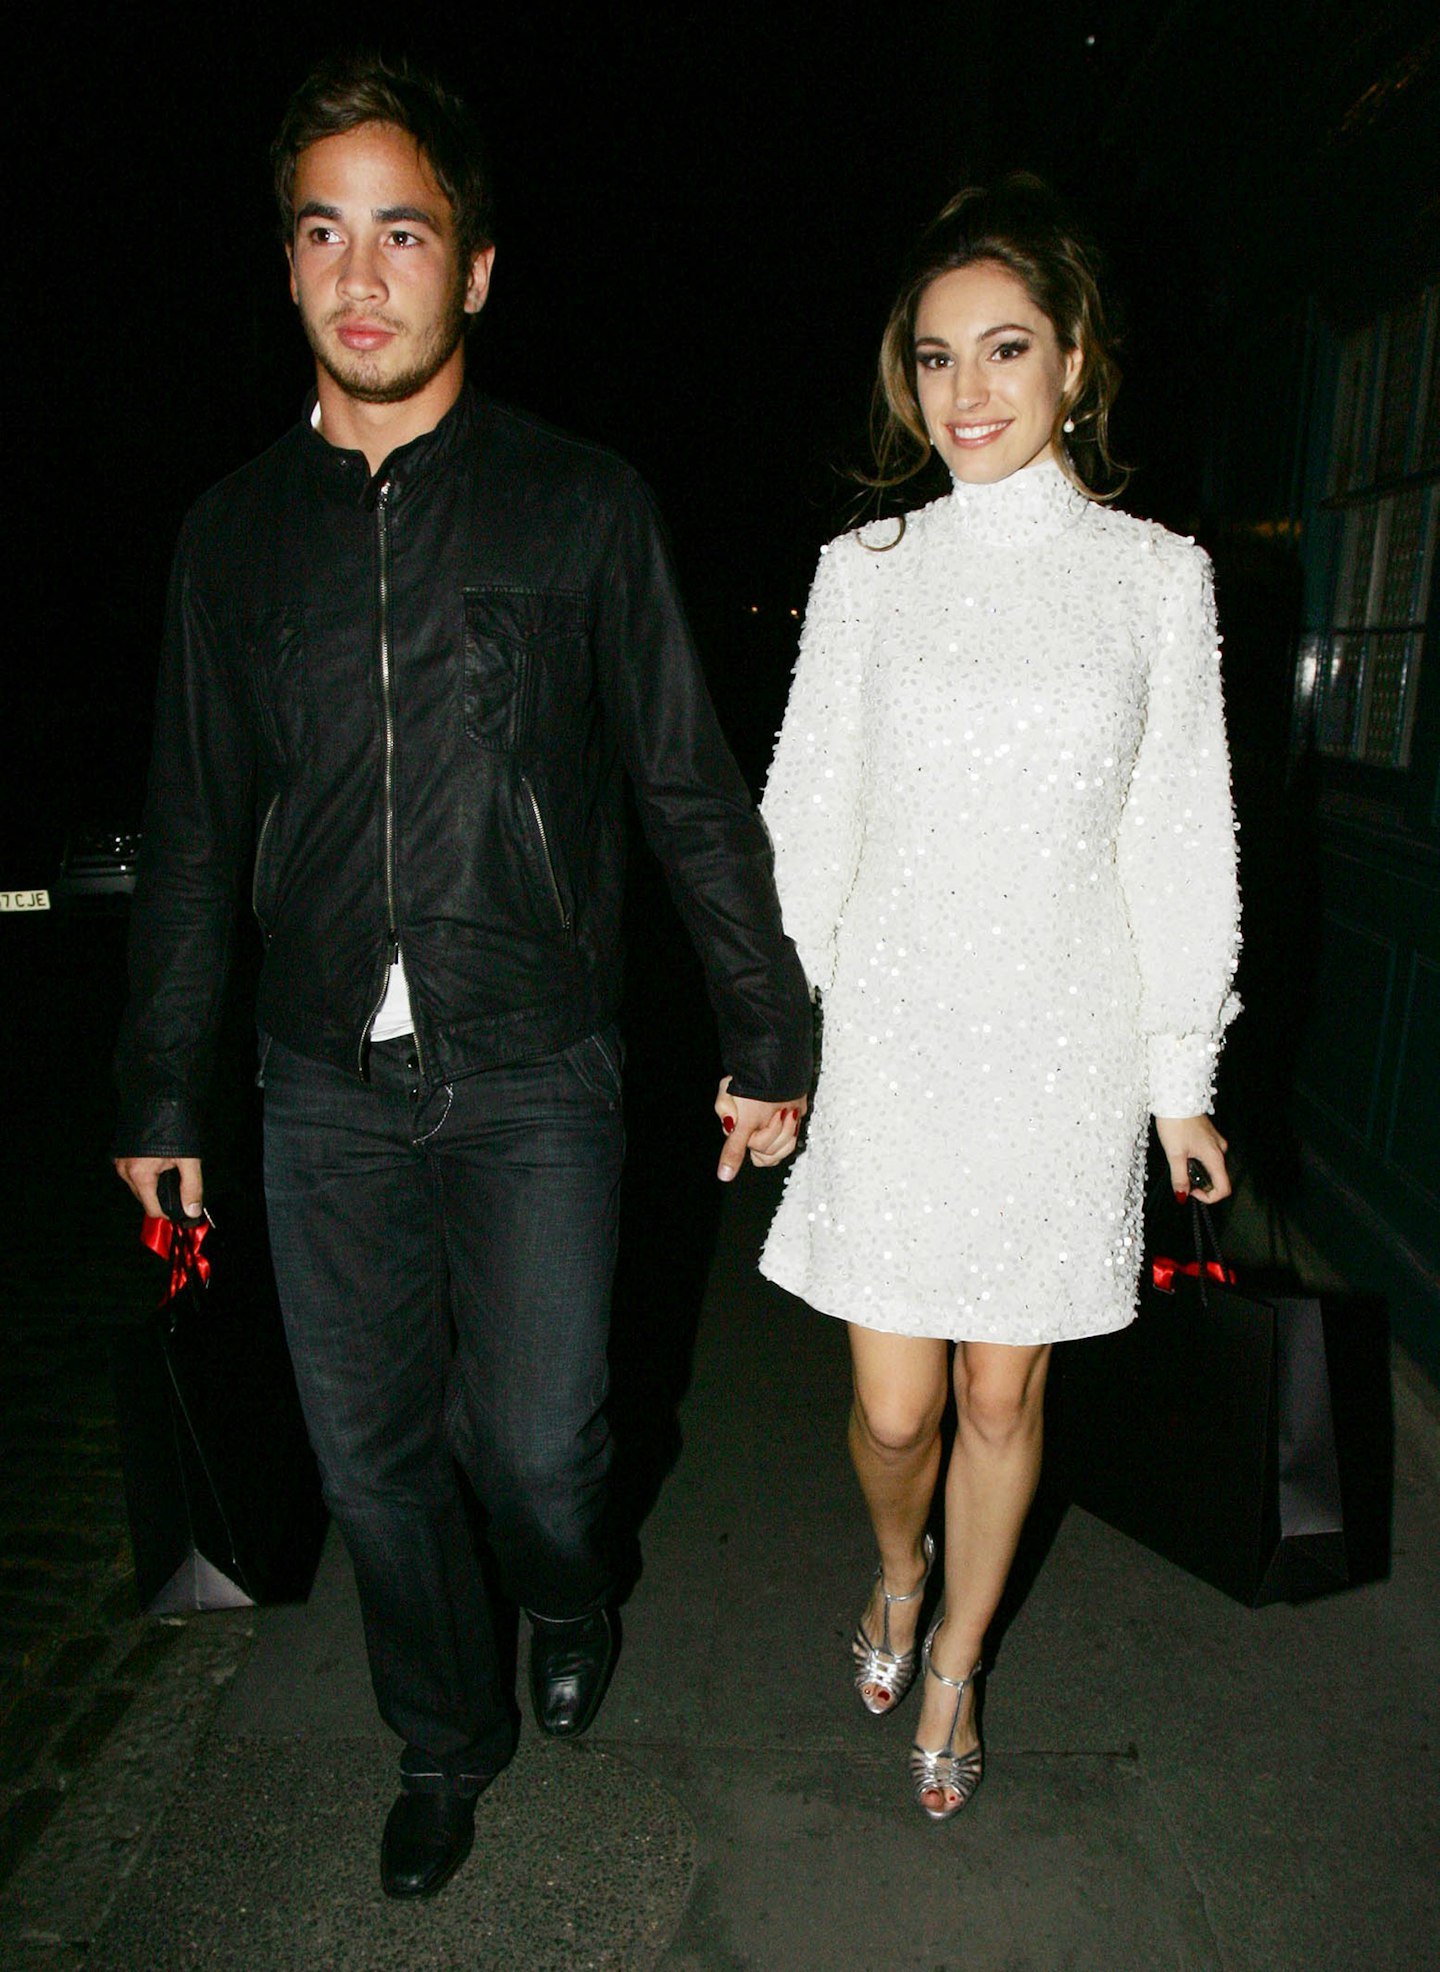 Kelly Brooks and Danny Cipriani